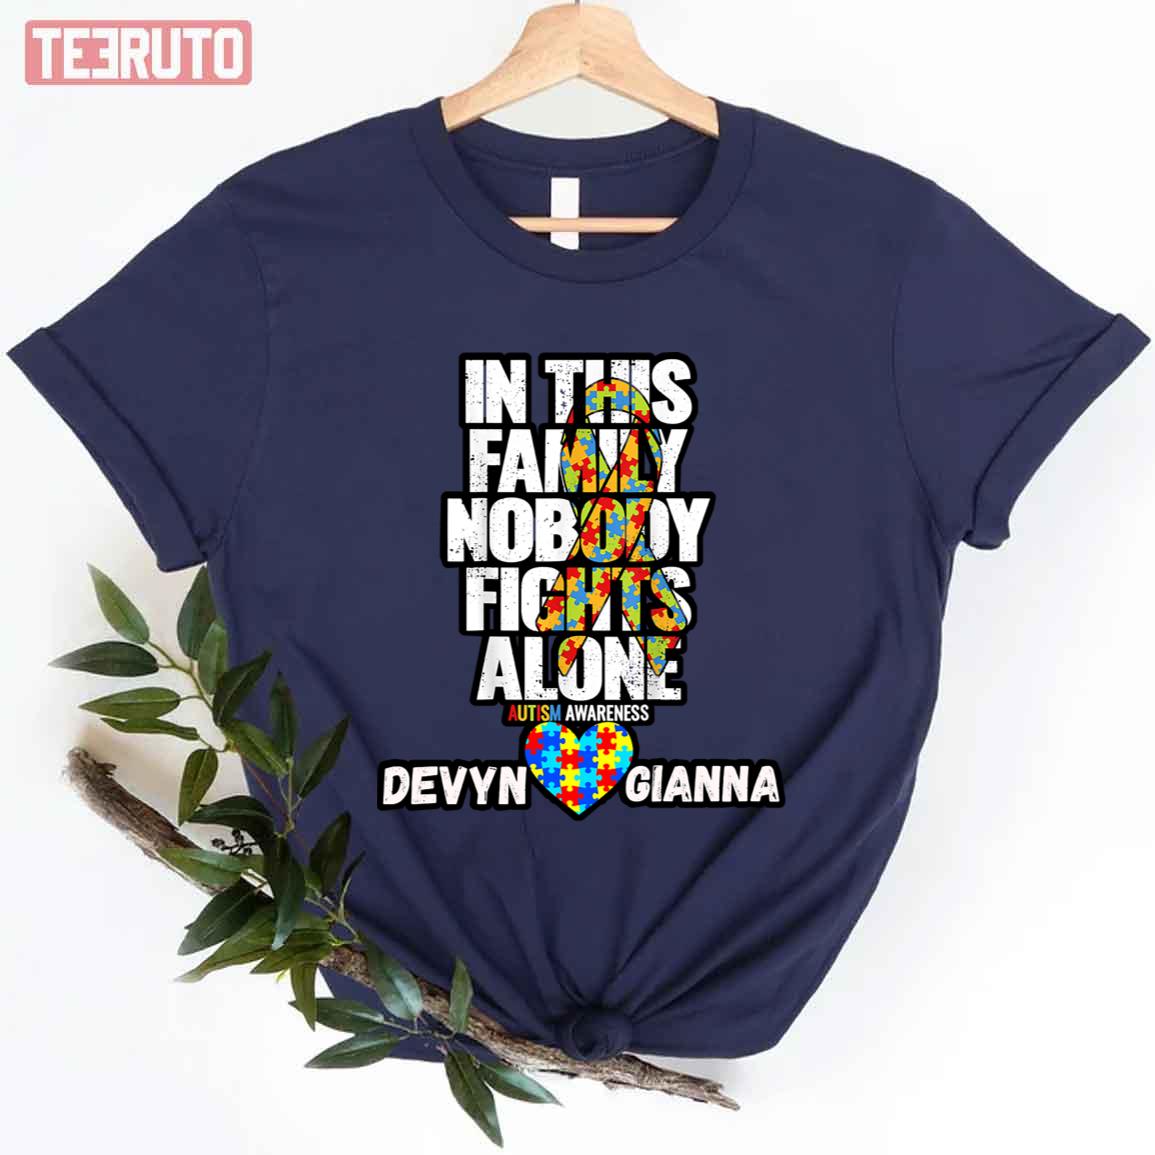 In This Family Nobody Fights Alone Autism Awareness Devyn Gianna Unisex T-shirt